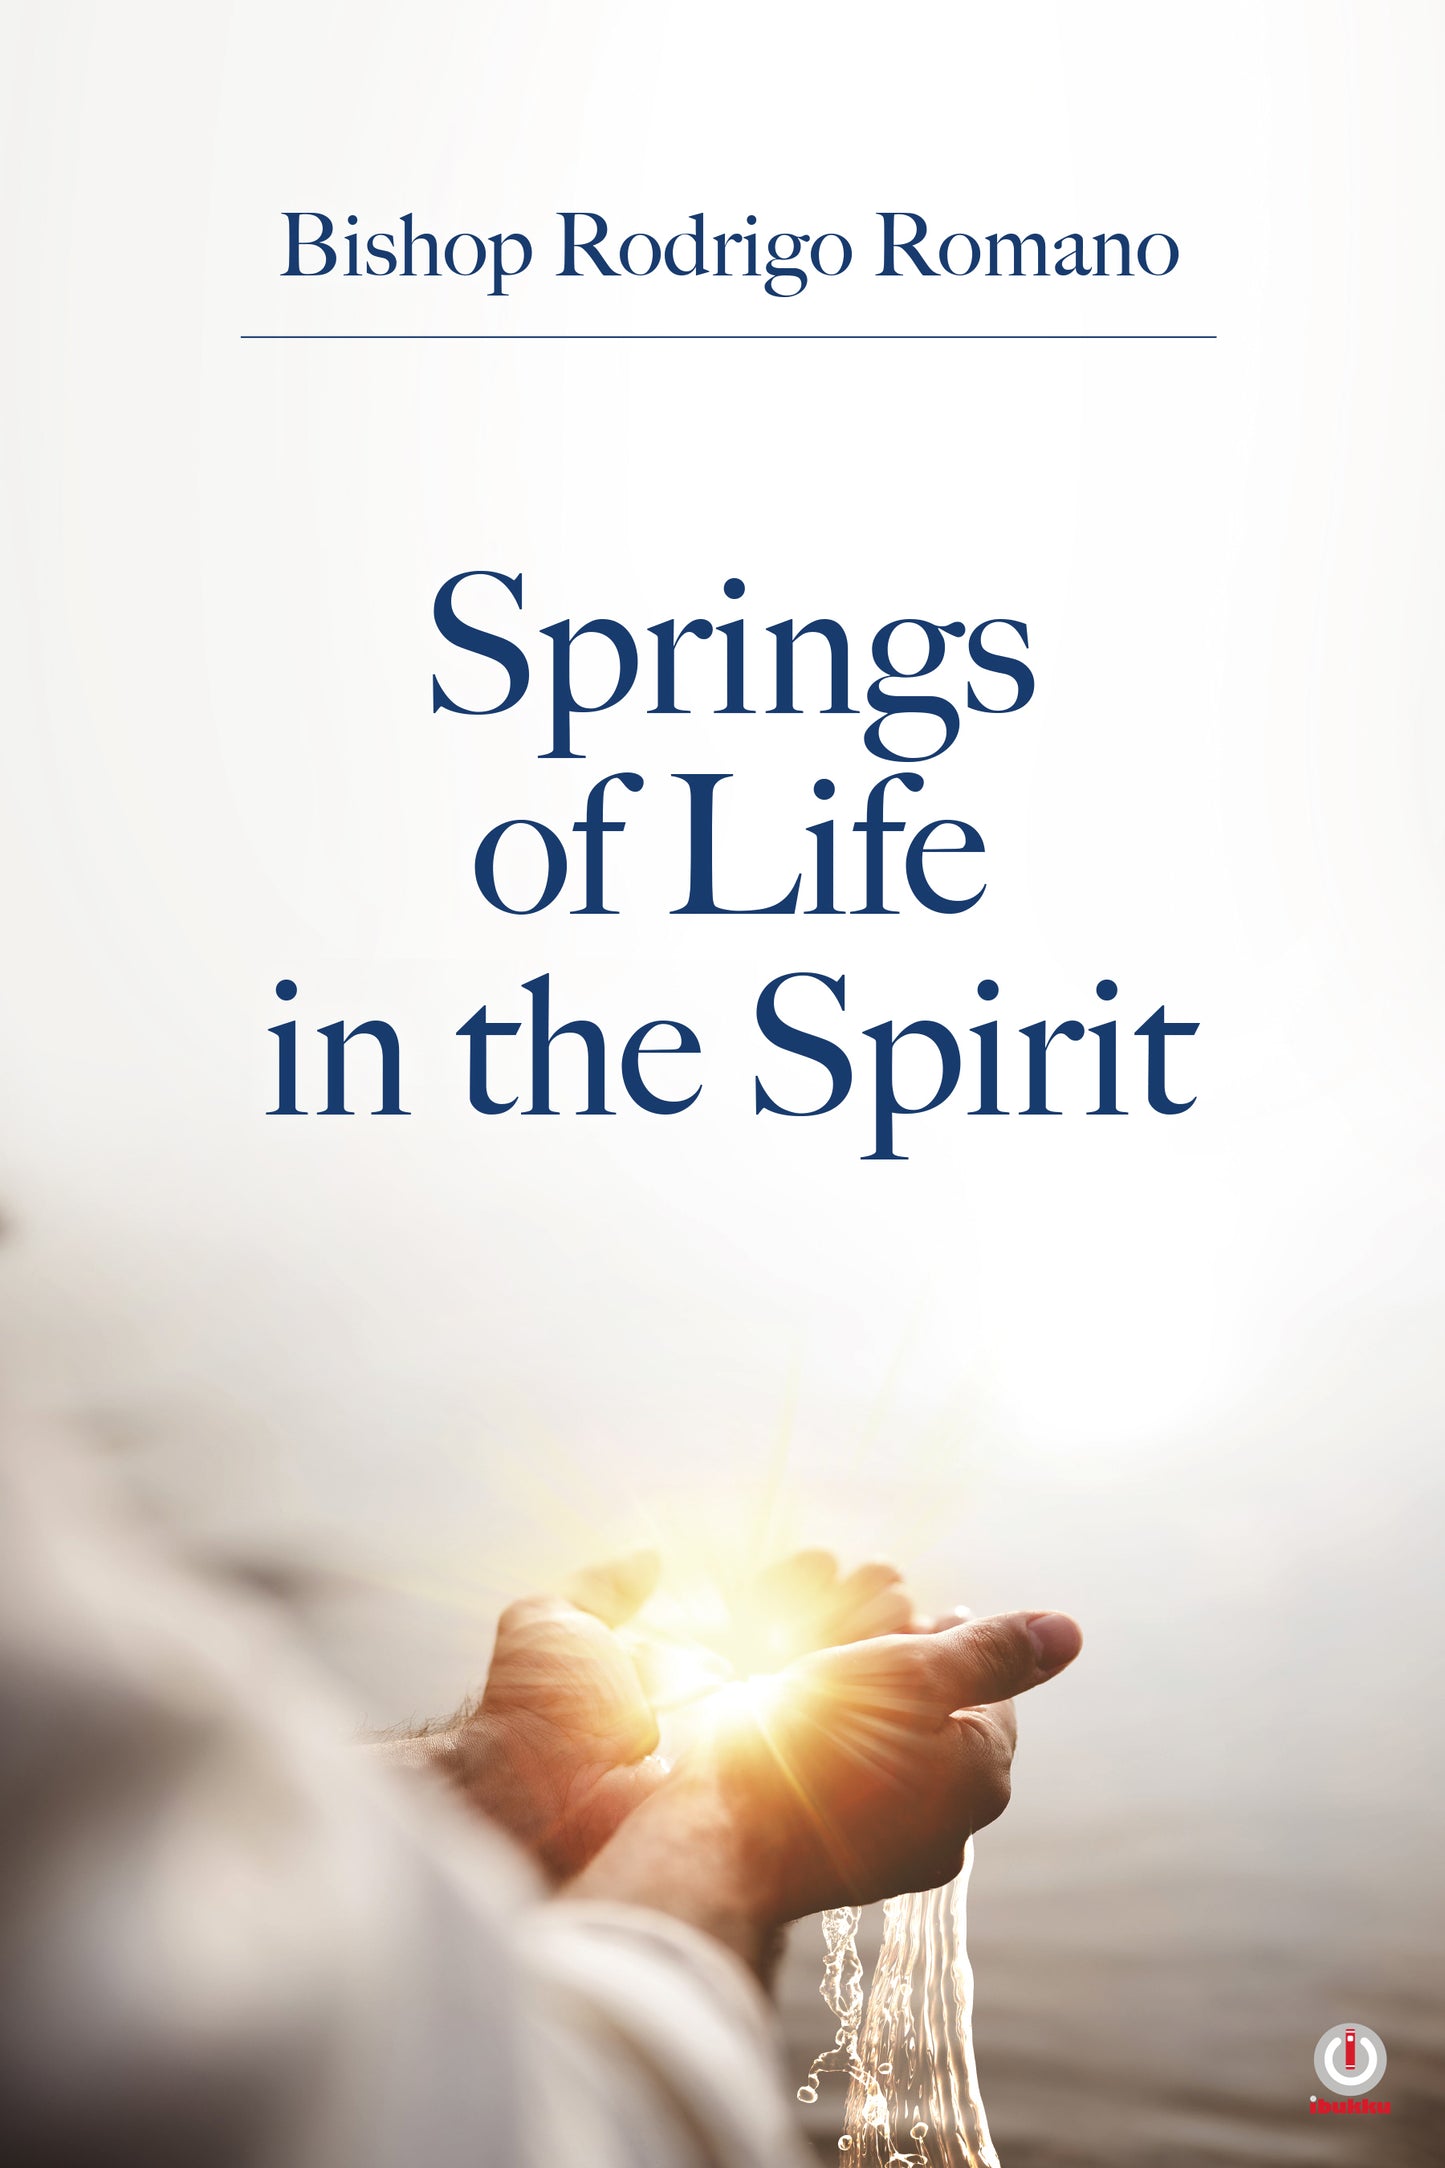 Springs of Life in the Spirit